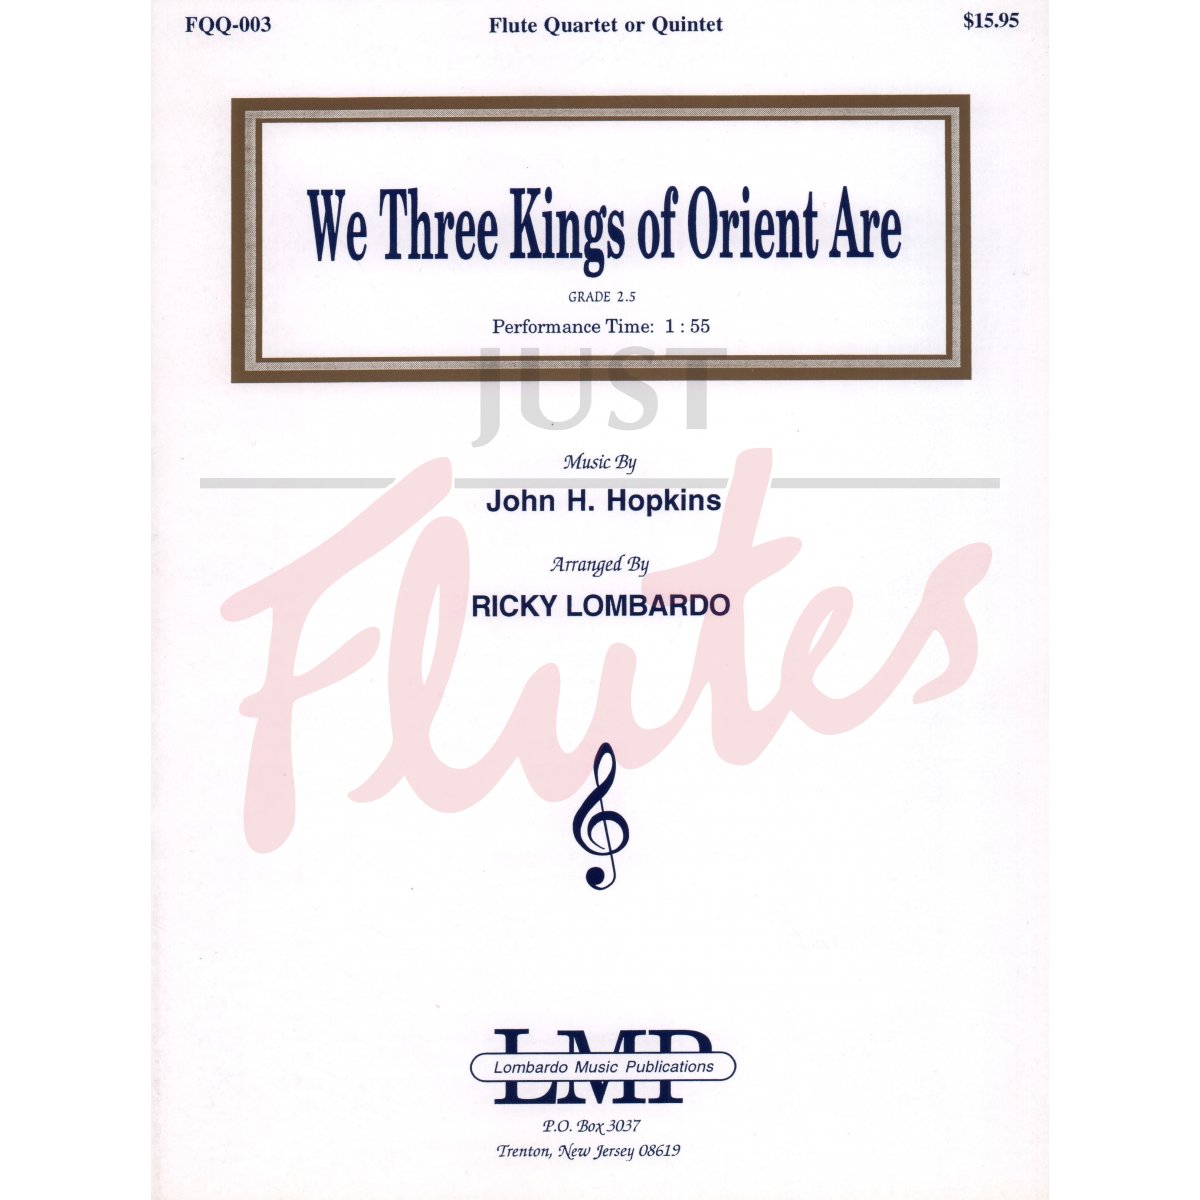 We Three Kings of Orient Are for Flute Quartet or Quintet